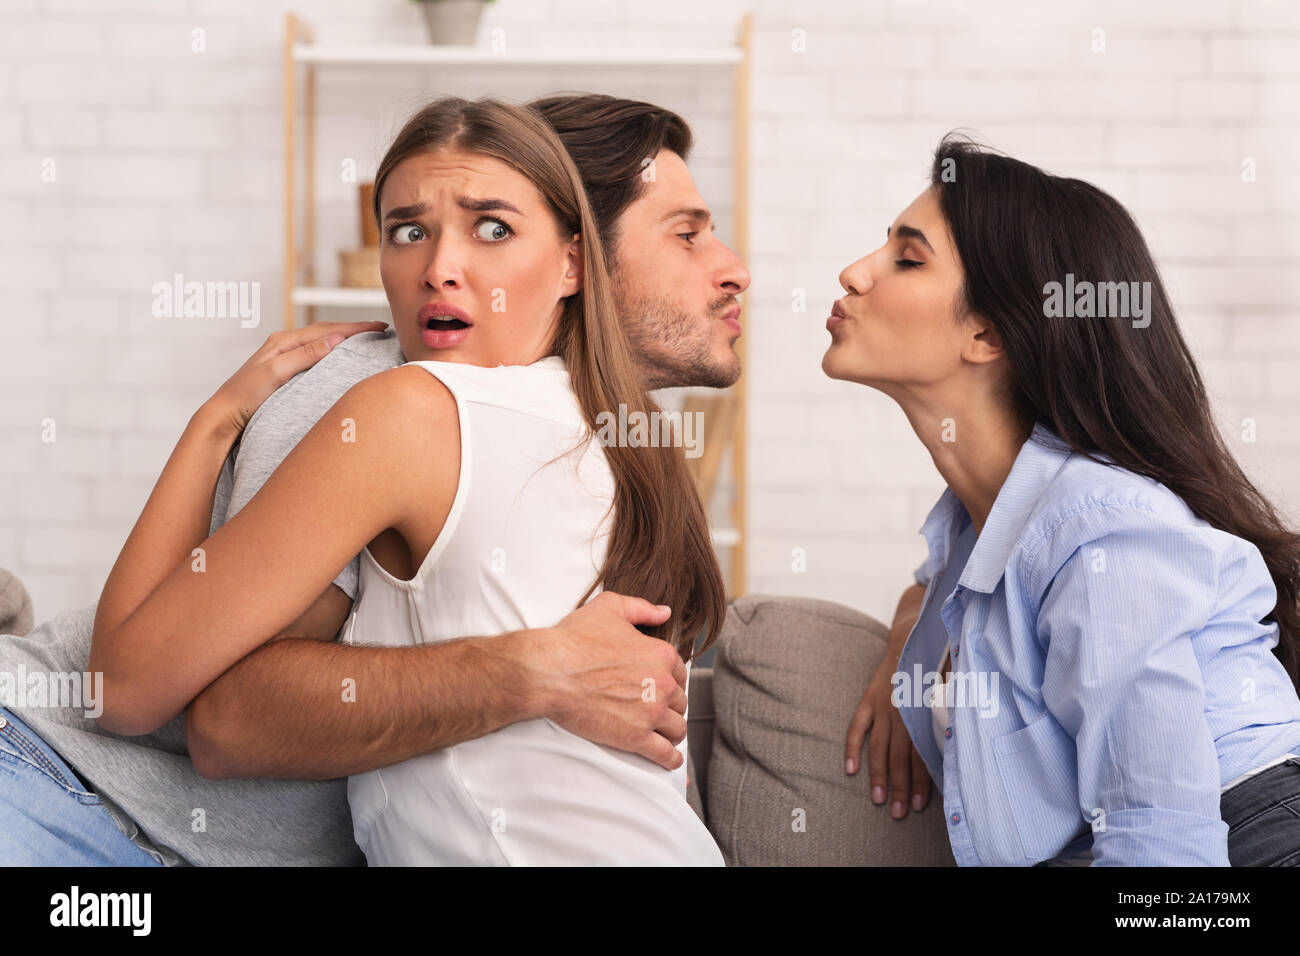 Cheating Boyfriend Kissing Girl Hugging His Girlfriend On Couch Indoor Stock Photo